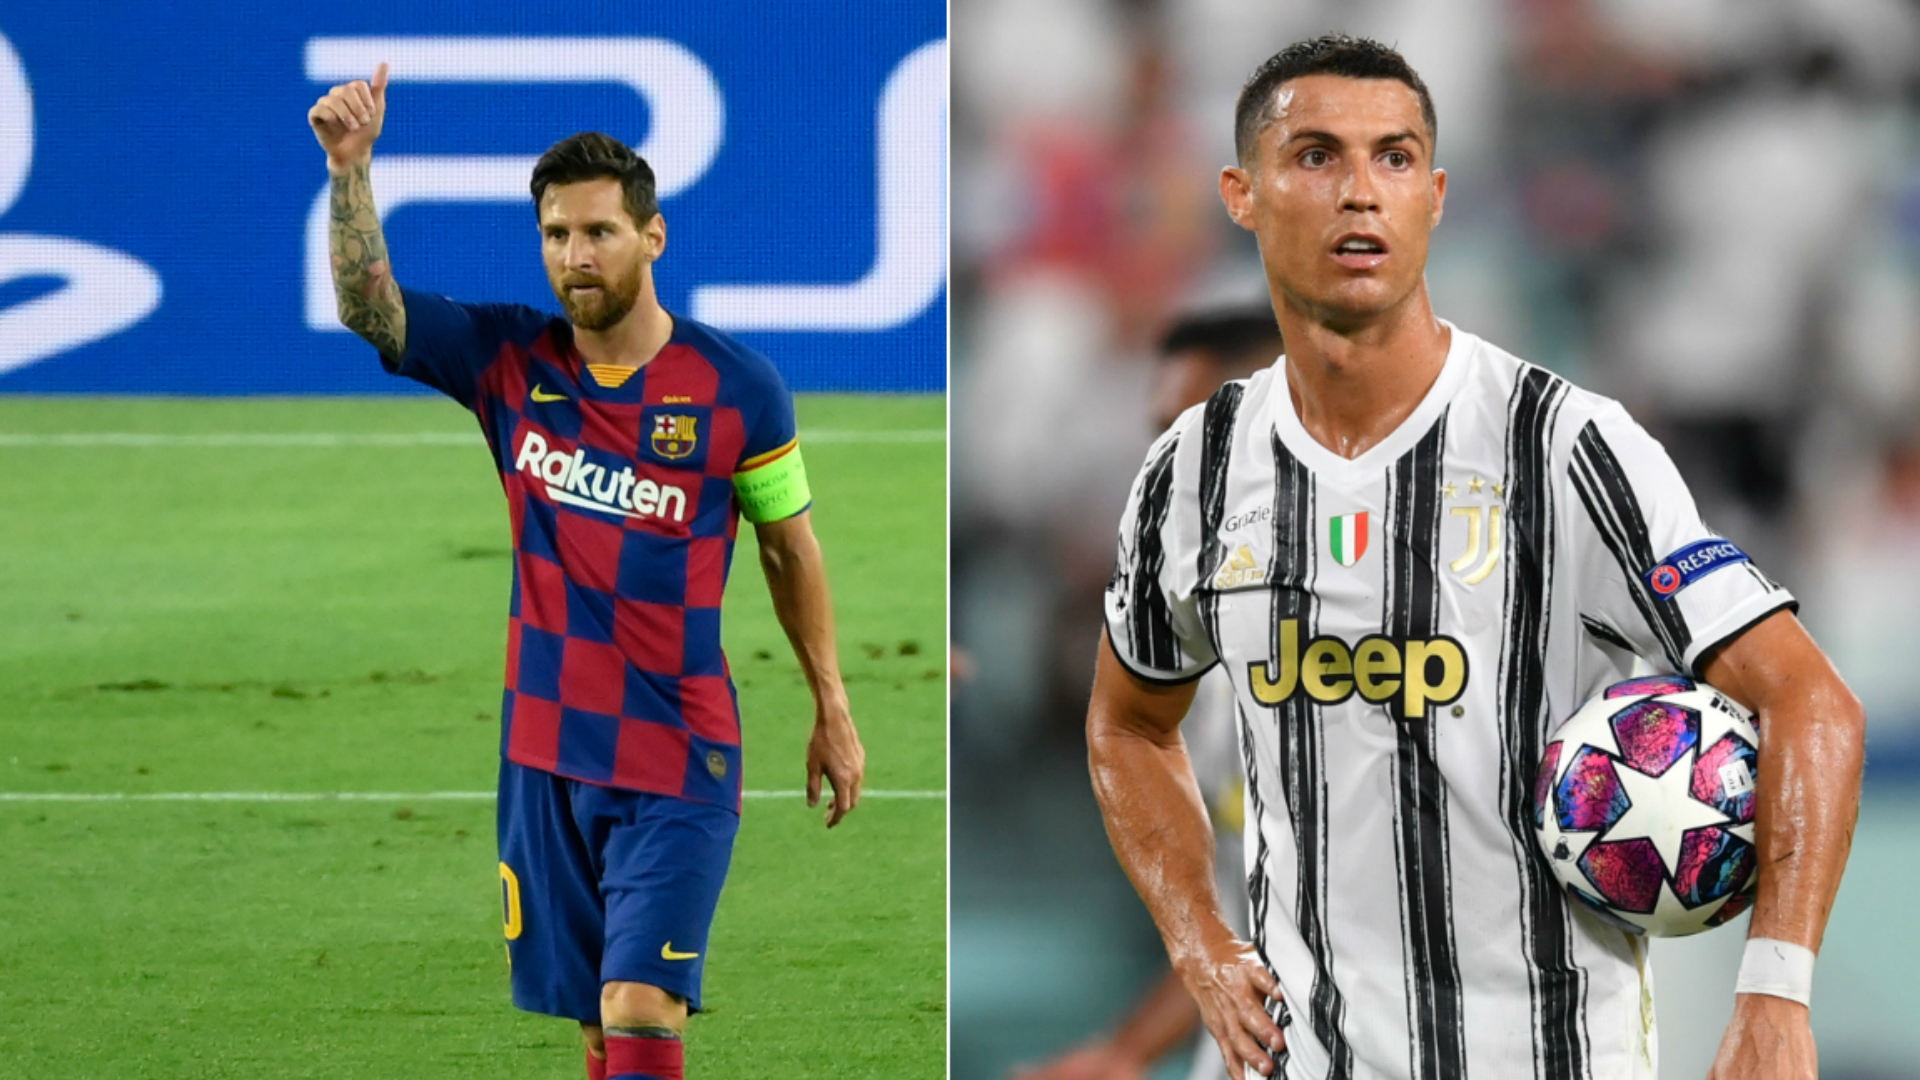 Superstars Lionel Messi and Cristiano Ronaldo will renew their rivalry in the group stage of the Champions League.